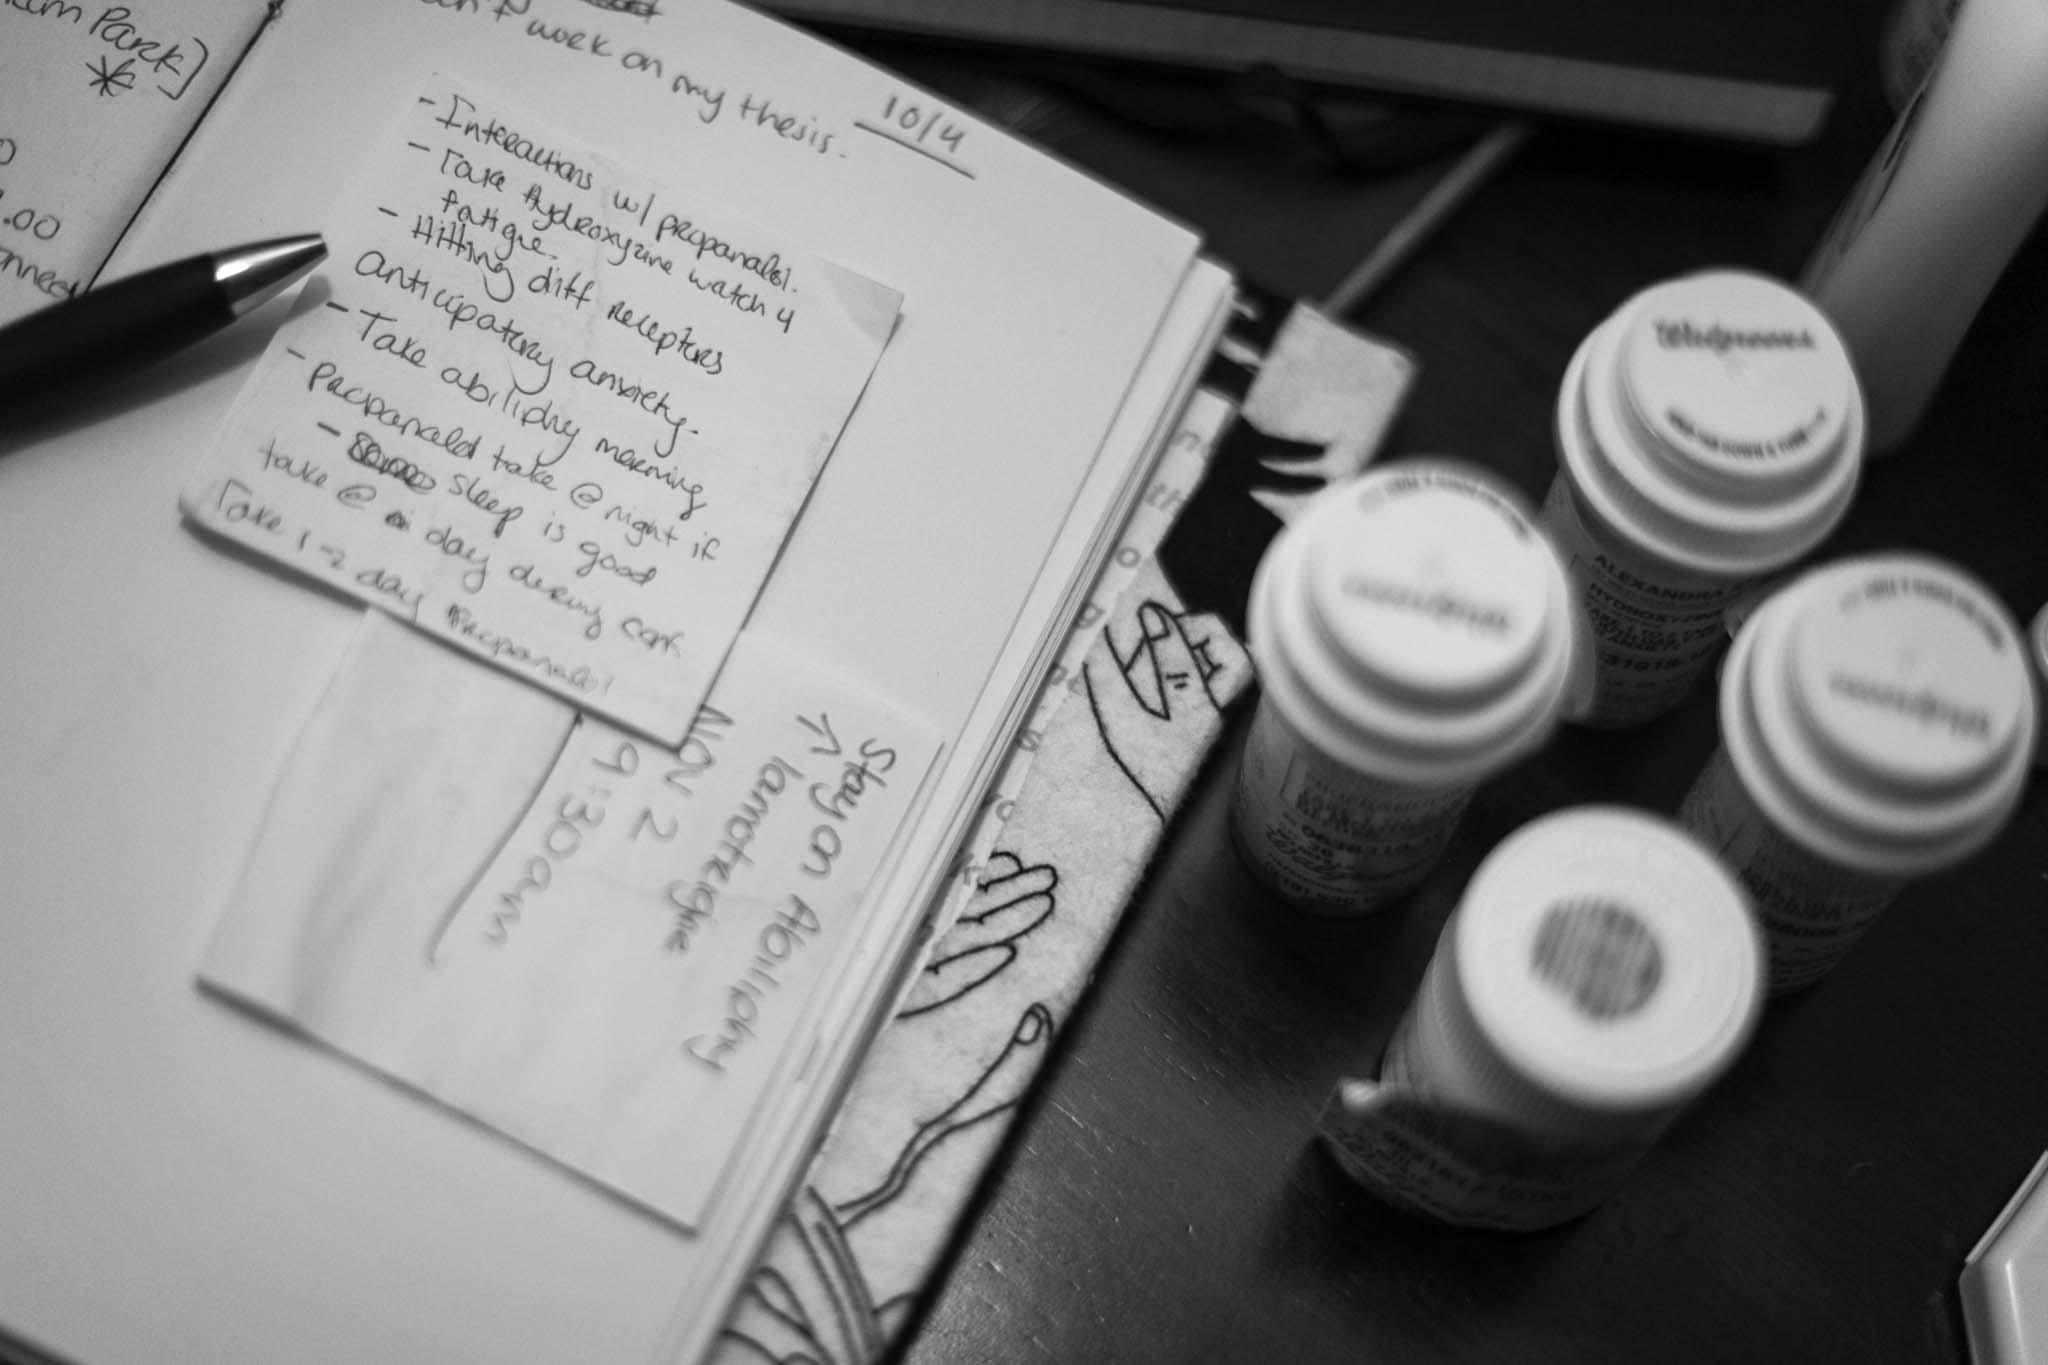 A love letter to self  - My journal lies open next to the different medications I...